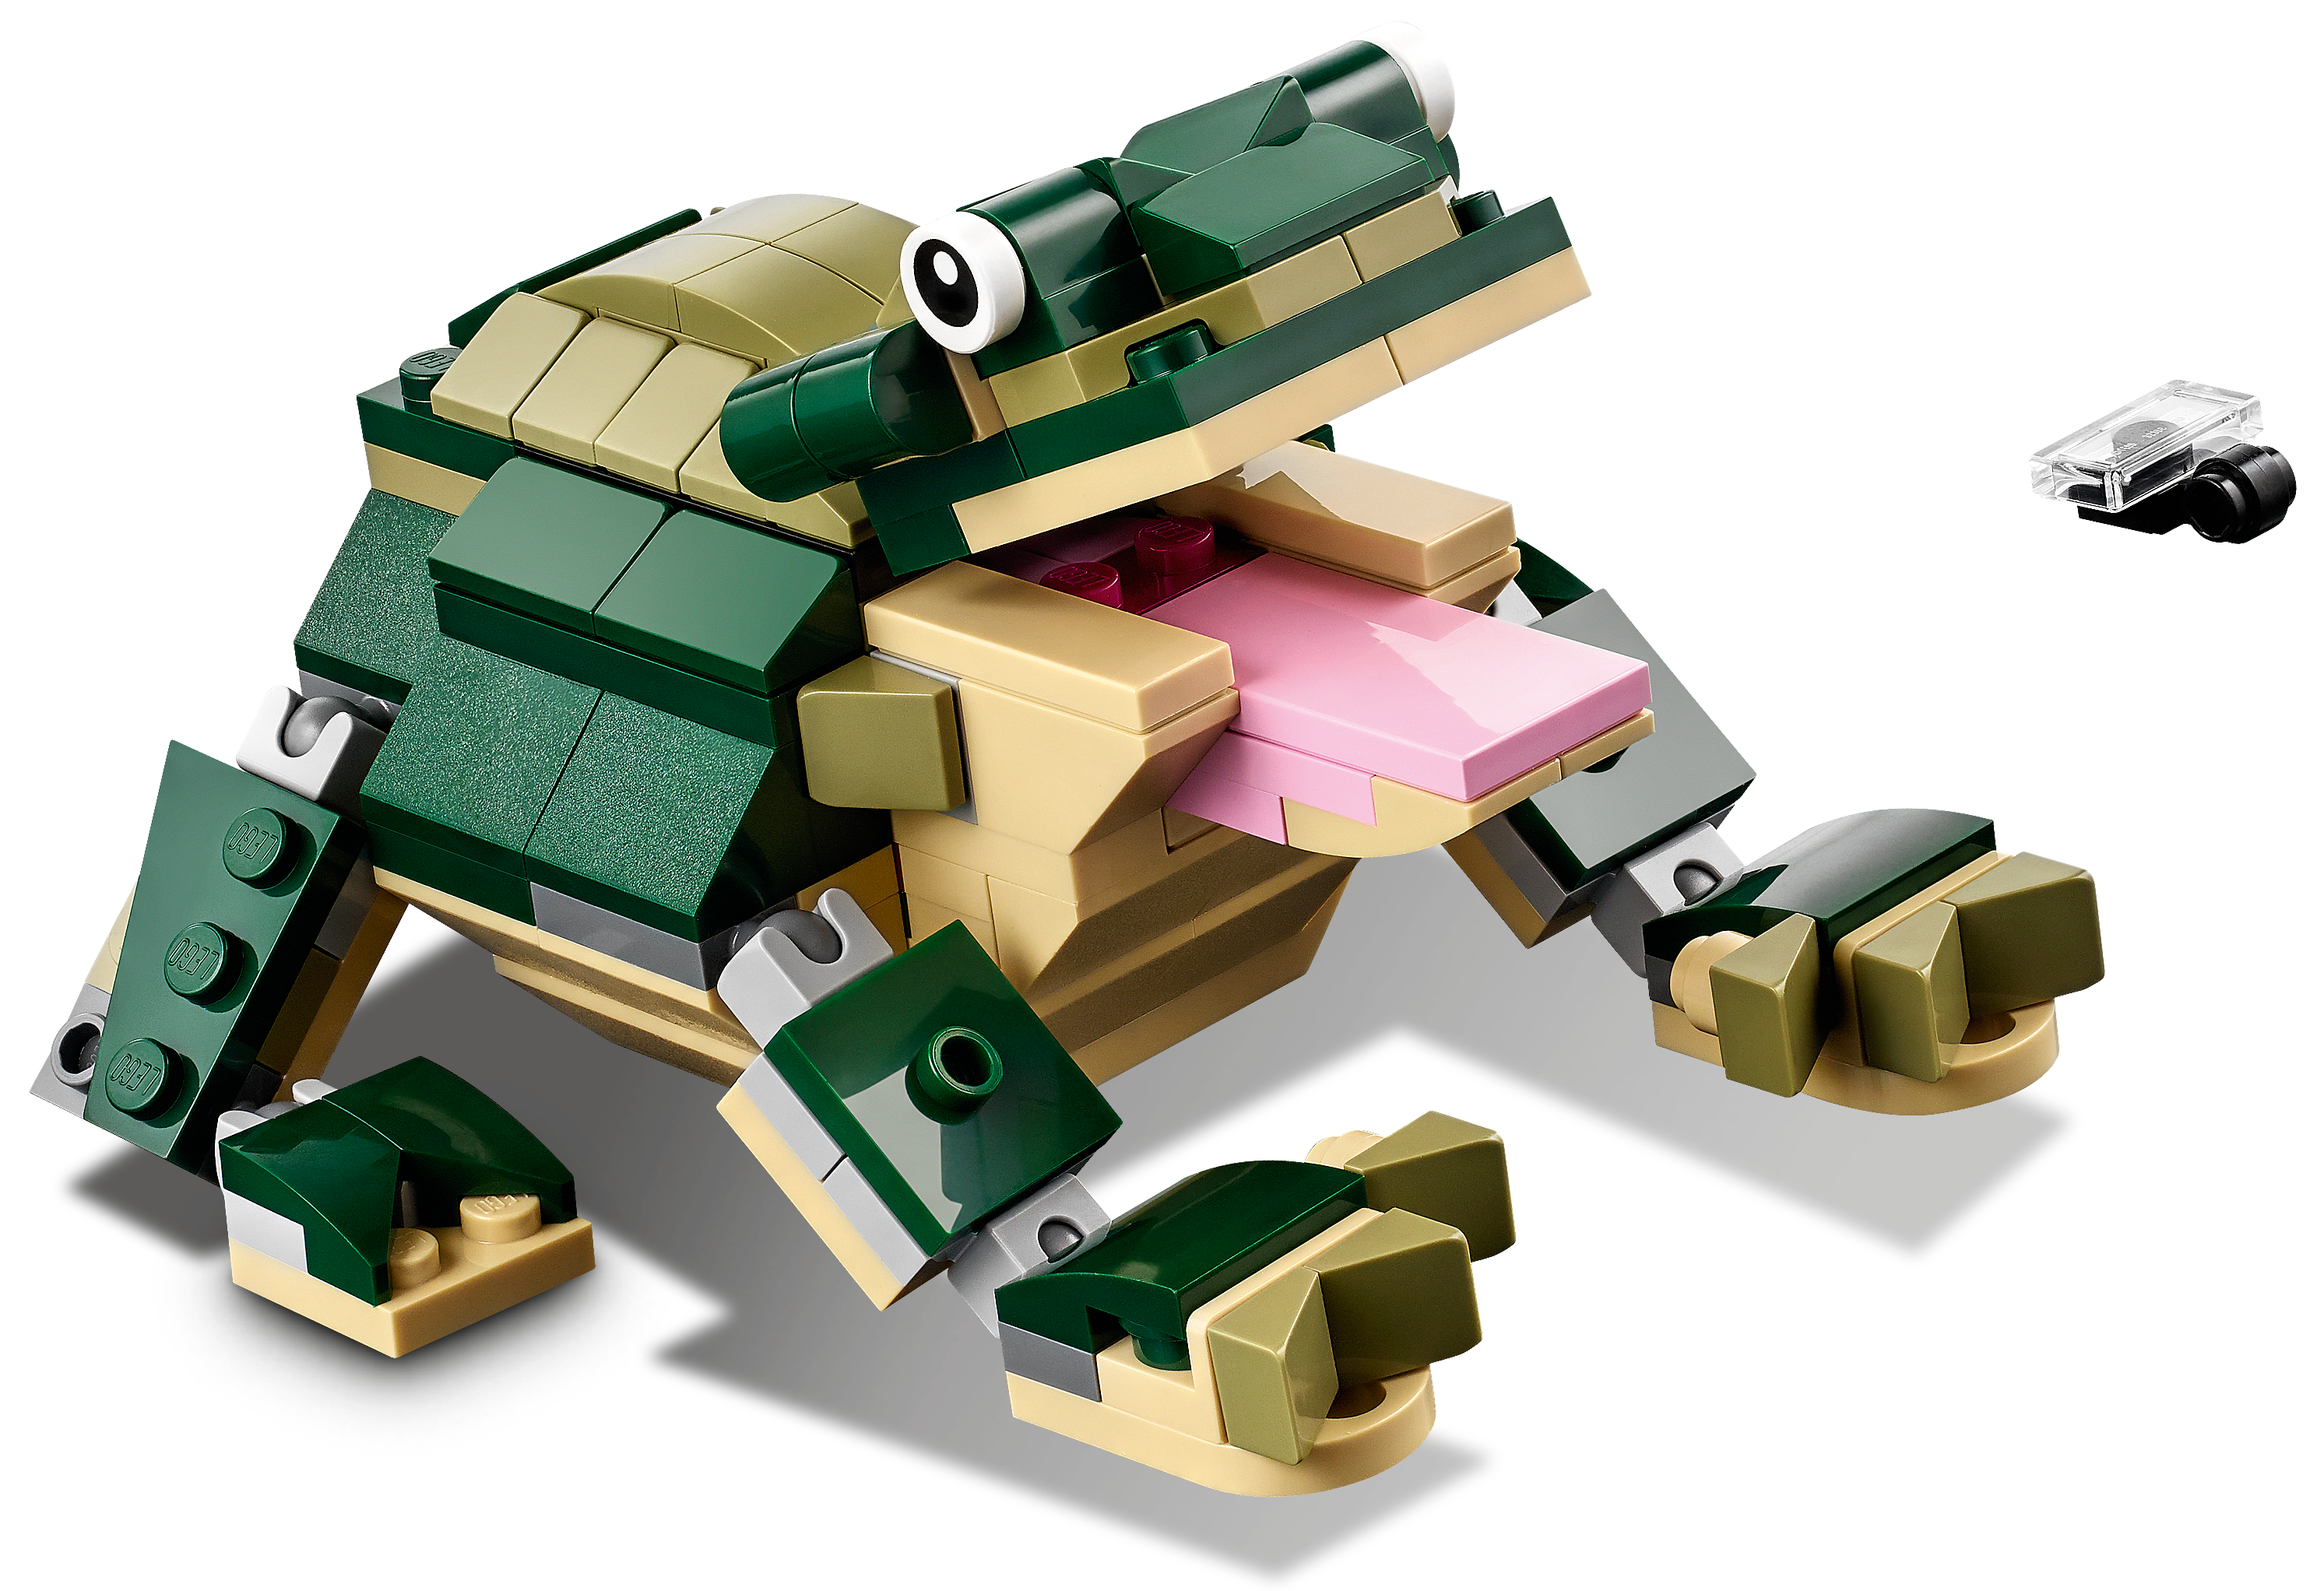 LEGO Creator 3in1 Crocodile 31121 Building Toy Featuring Wild Animal Toys,  for ages 7+, (454 Pieces)